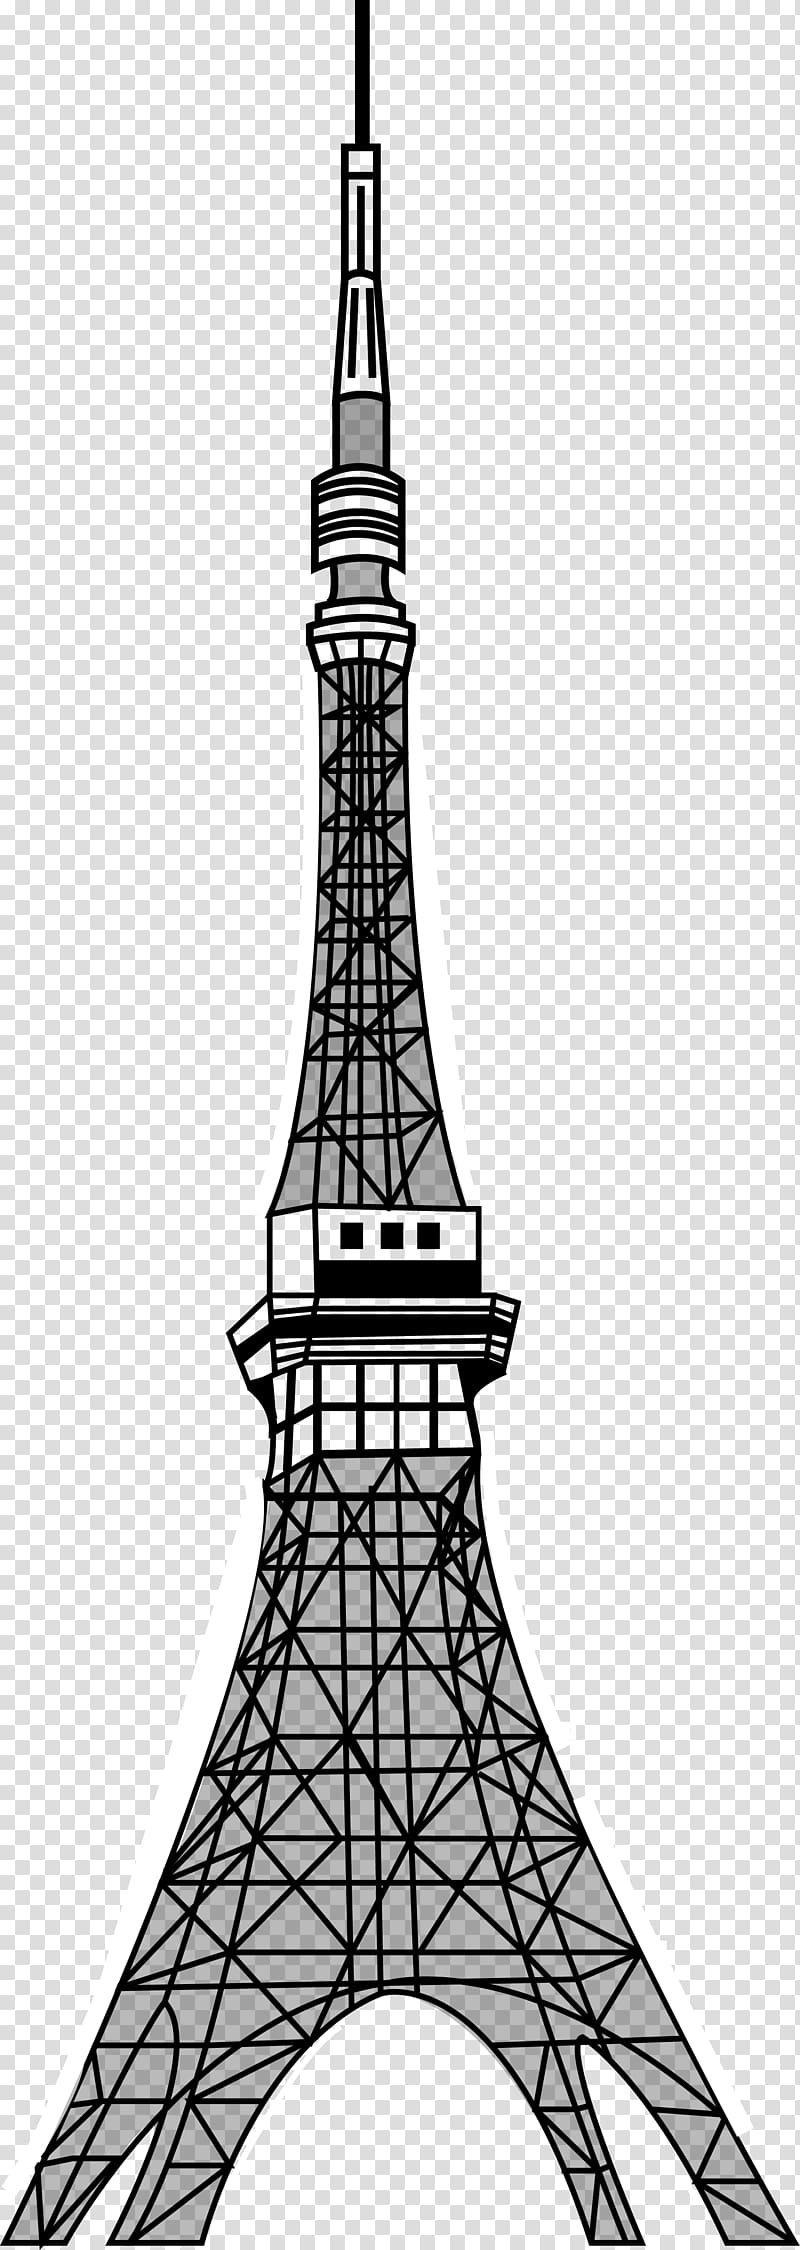 Tokyo Tower Drawing Landmark, tokyo tower transparent background PNG clipart